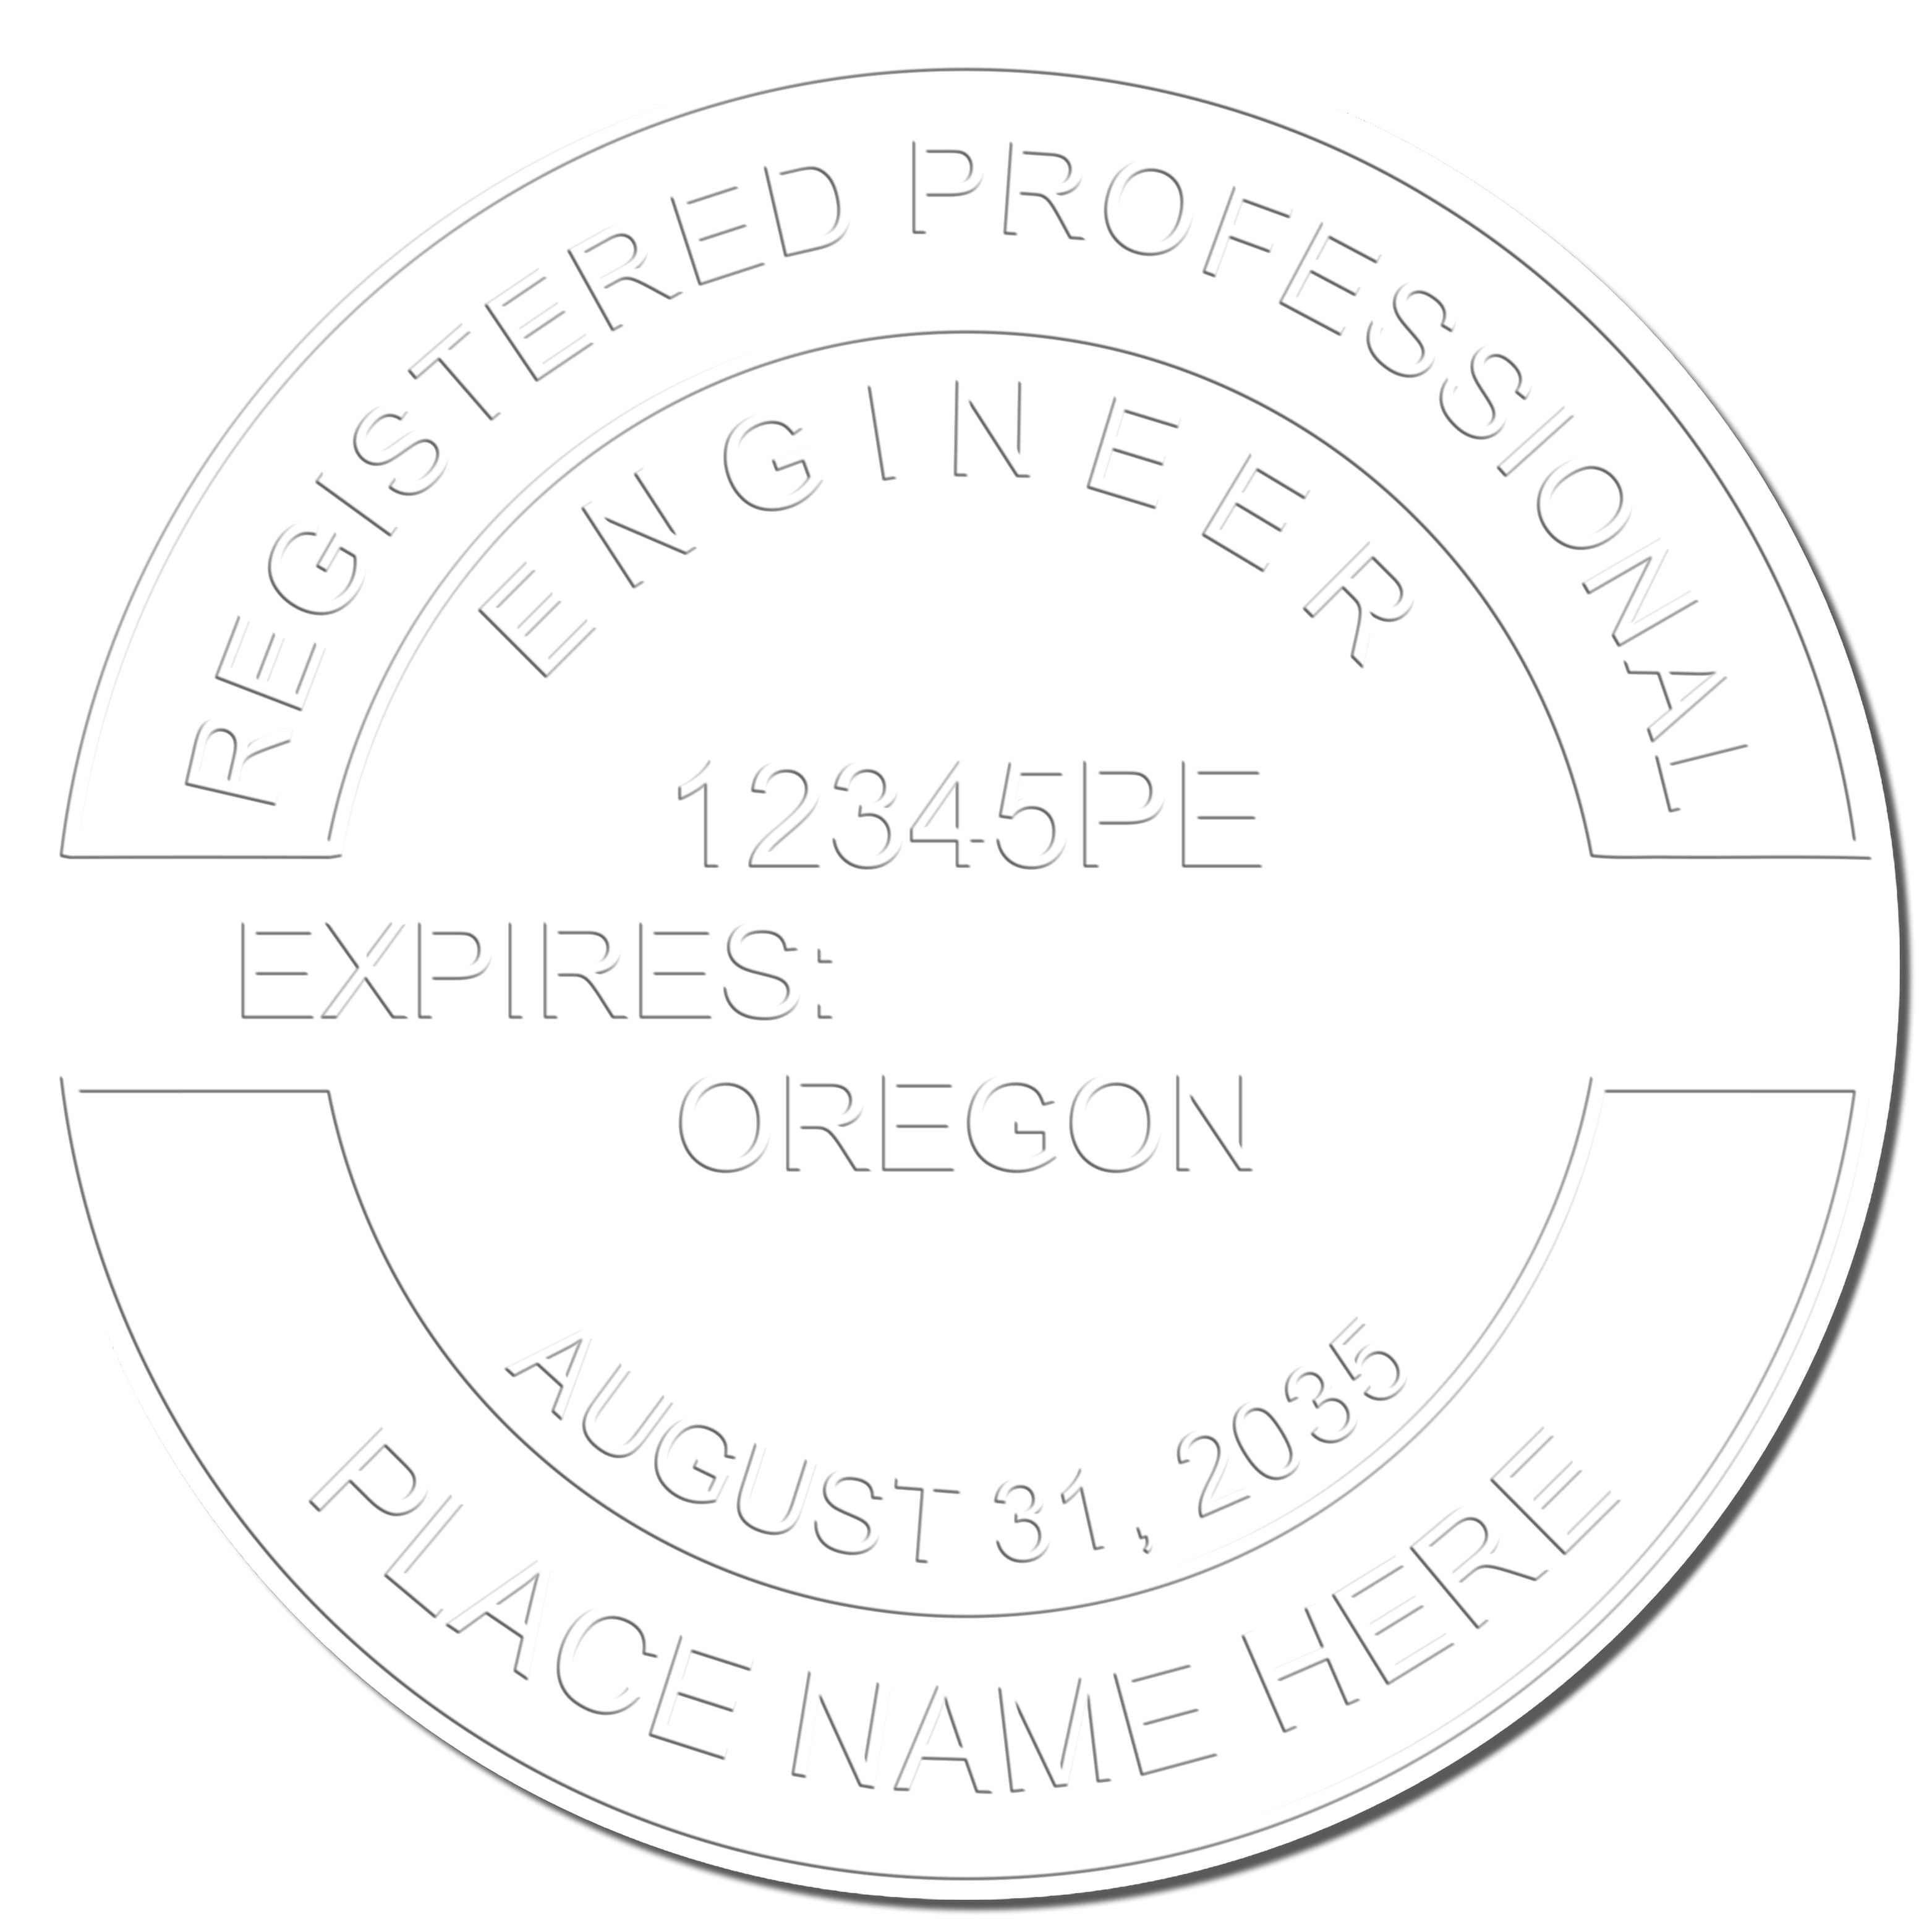 The Long Reach Oregon PE Seal stamp impression comes to life with a crisp, detailed photo on paper - showcasing true professional quality.